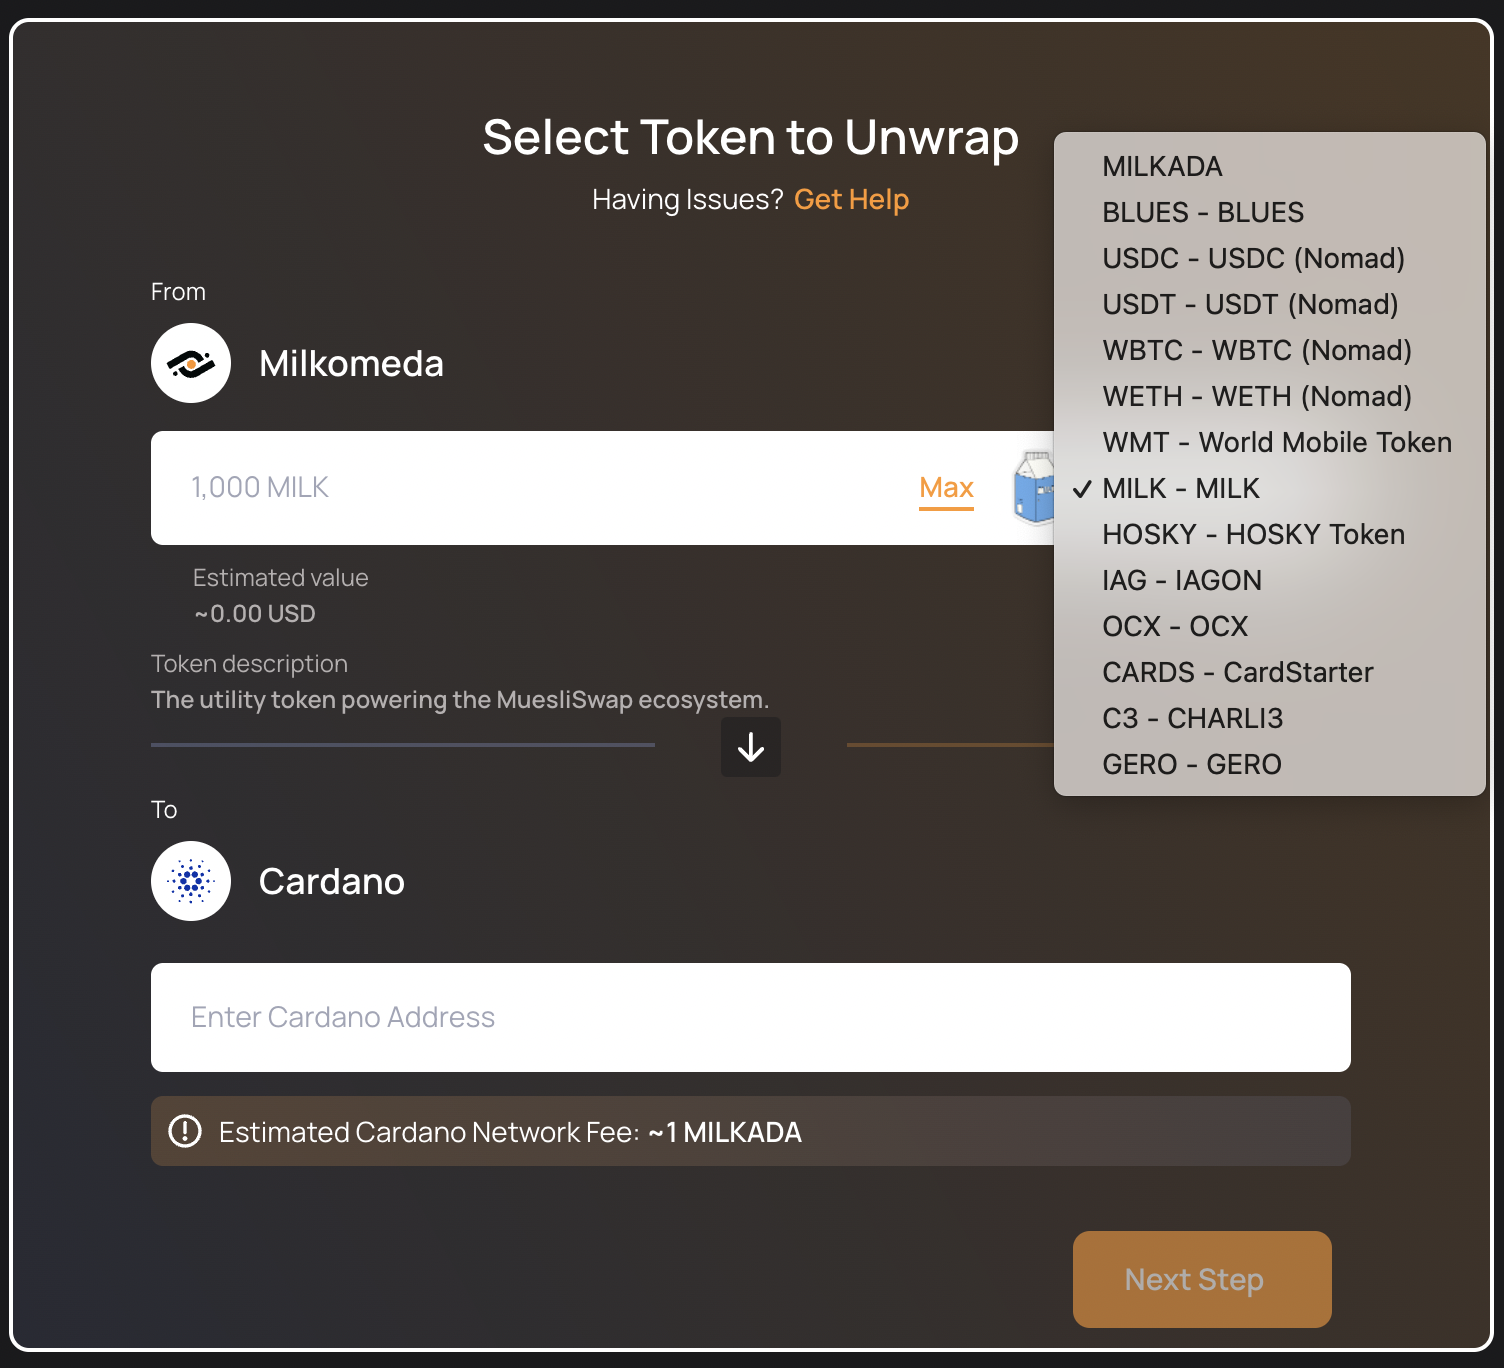 Select native asset for unwrapping